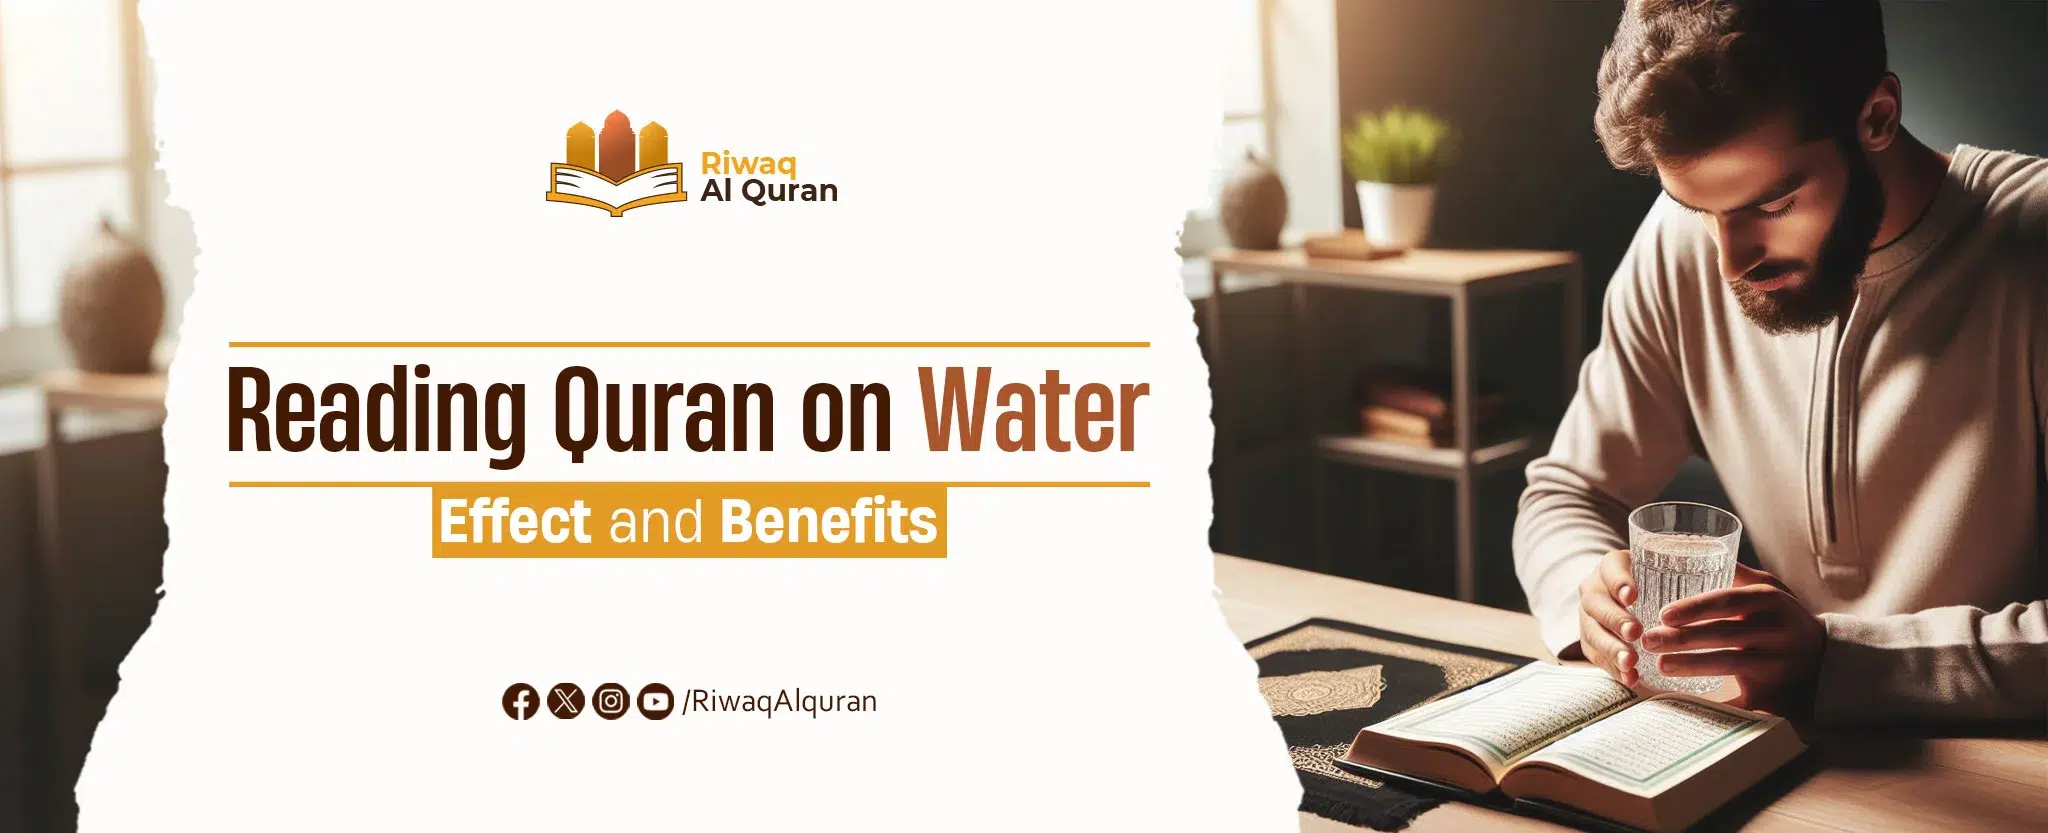 Reading Quran on Water: Effect and Benefits